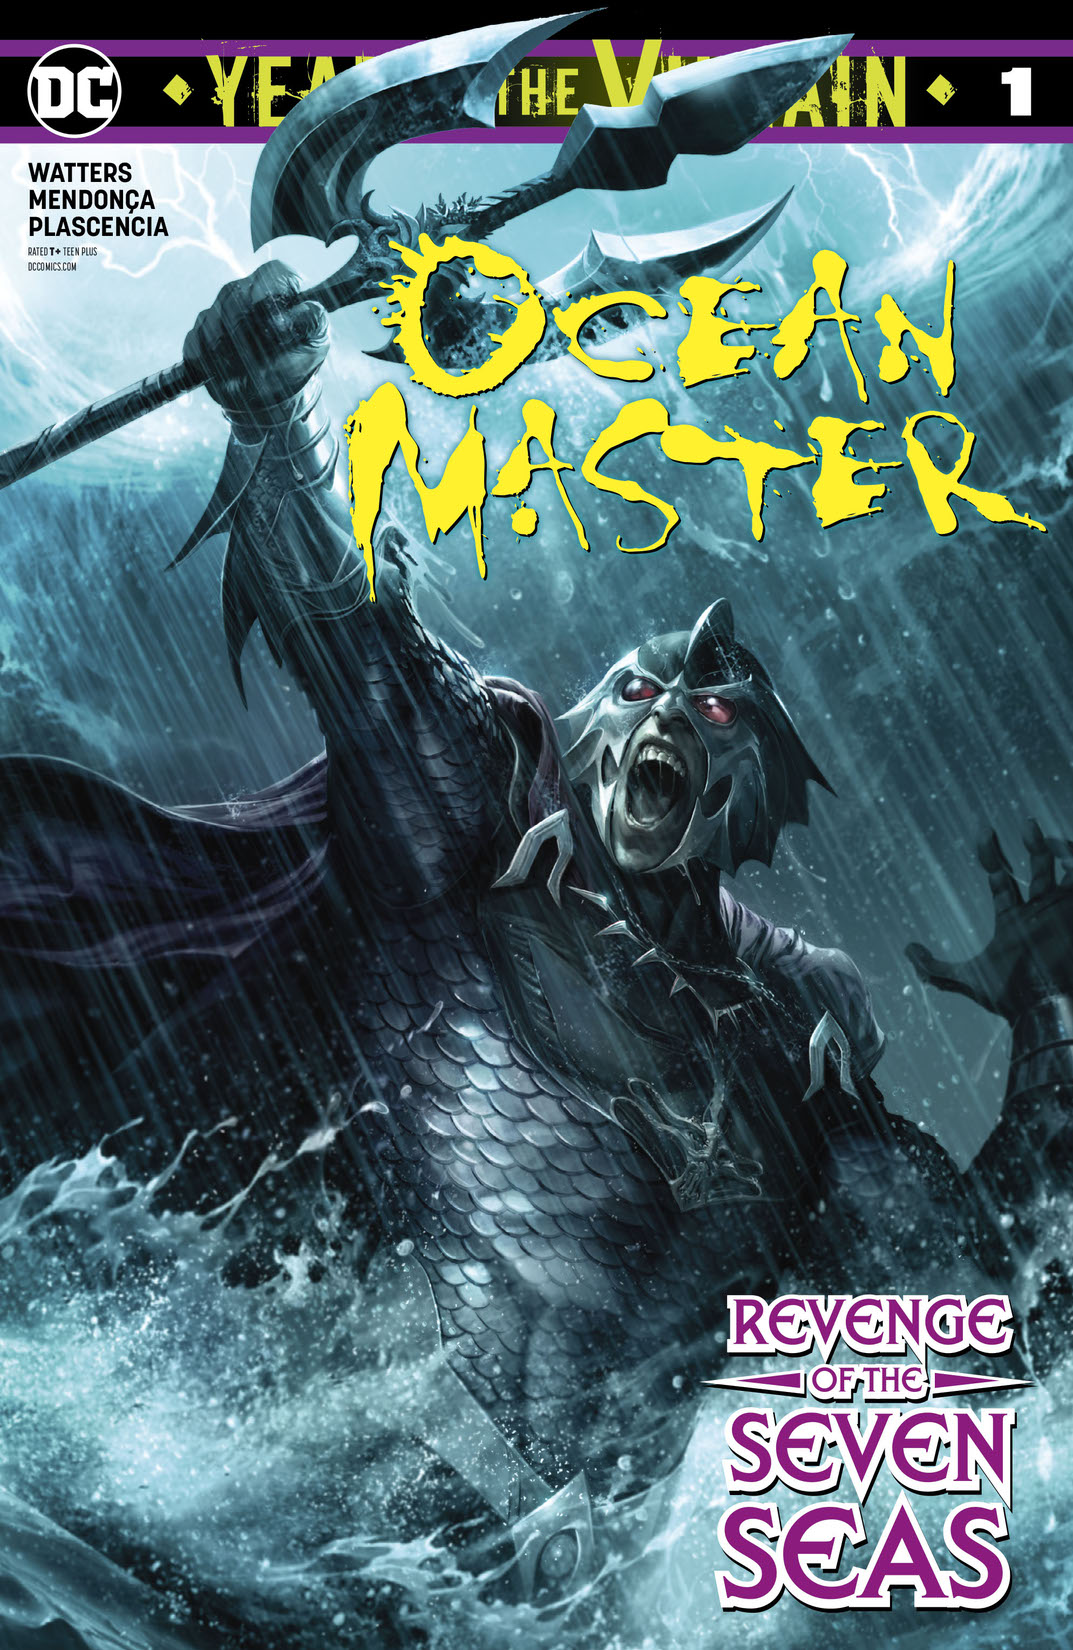 Ocean Master: Year of the Villain #1 preview images